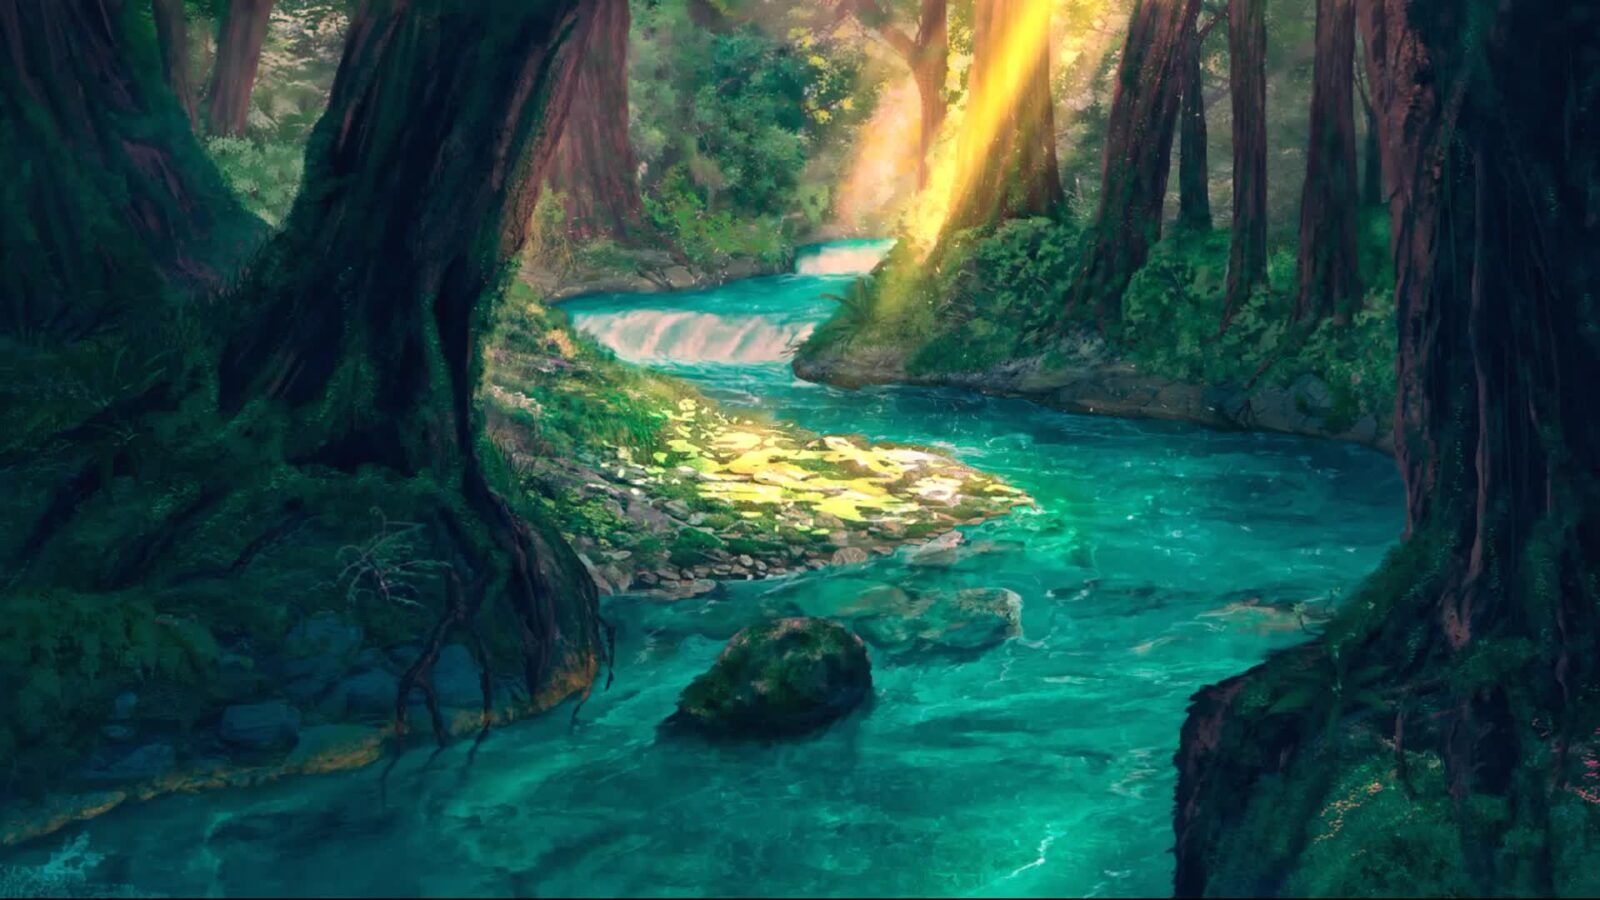 LiveWallpapers4Free.com | Fantasy Forest And Magic River - Animated Wallpaper